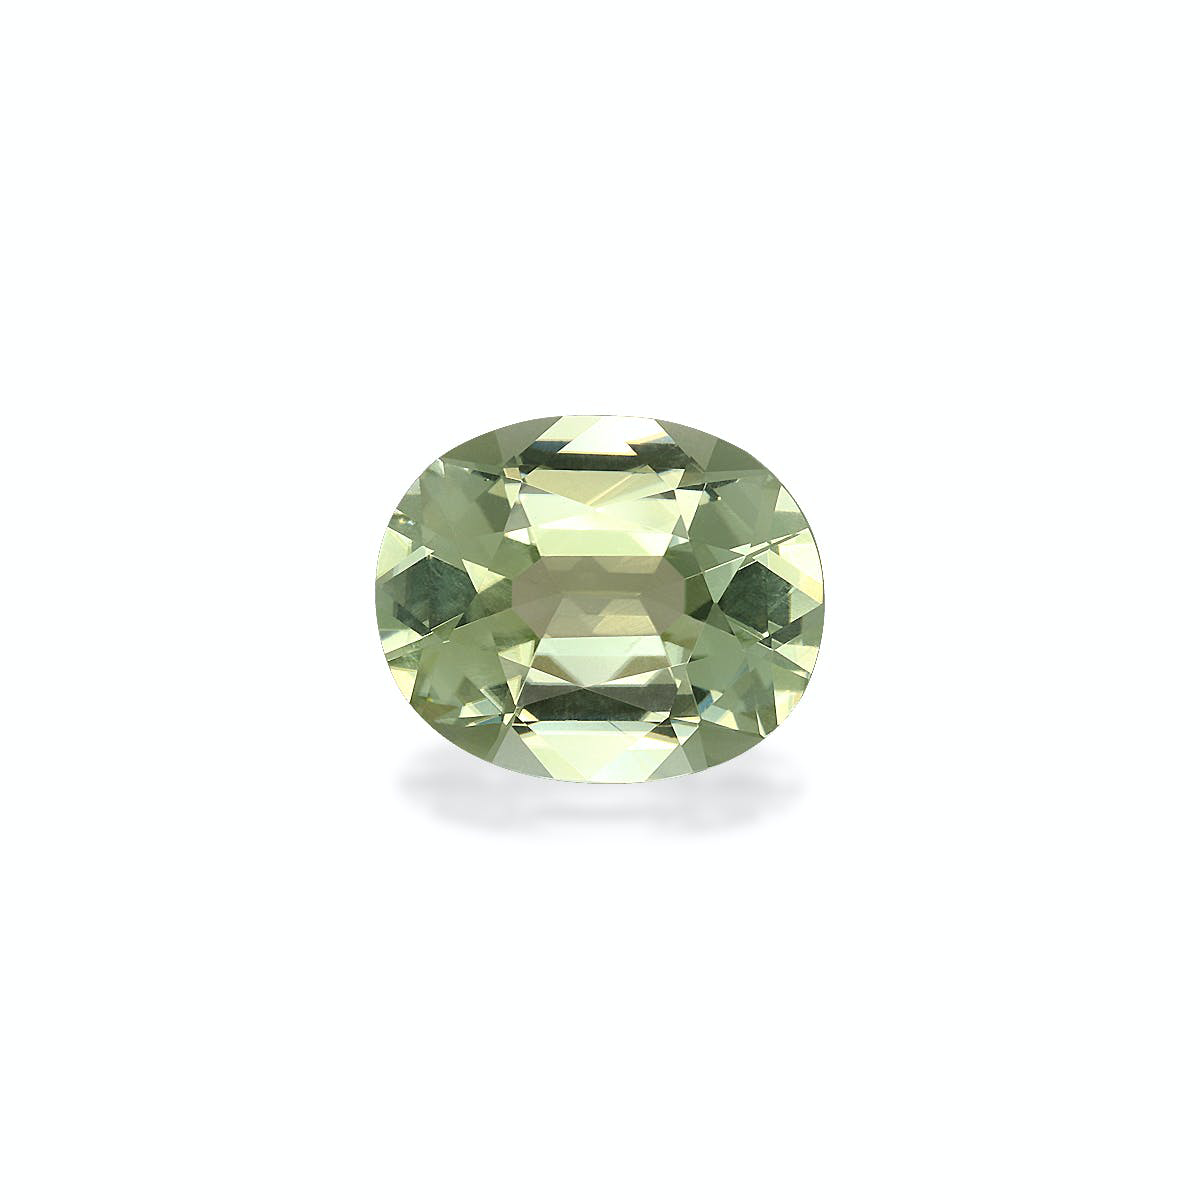 Picture of Pale Green Tourmaline 4.09ct - 12x10mm (TG1426)